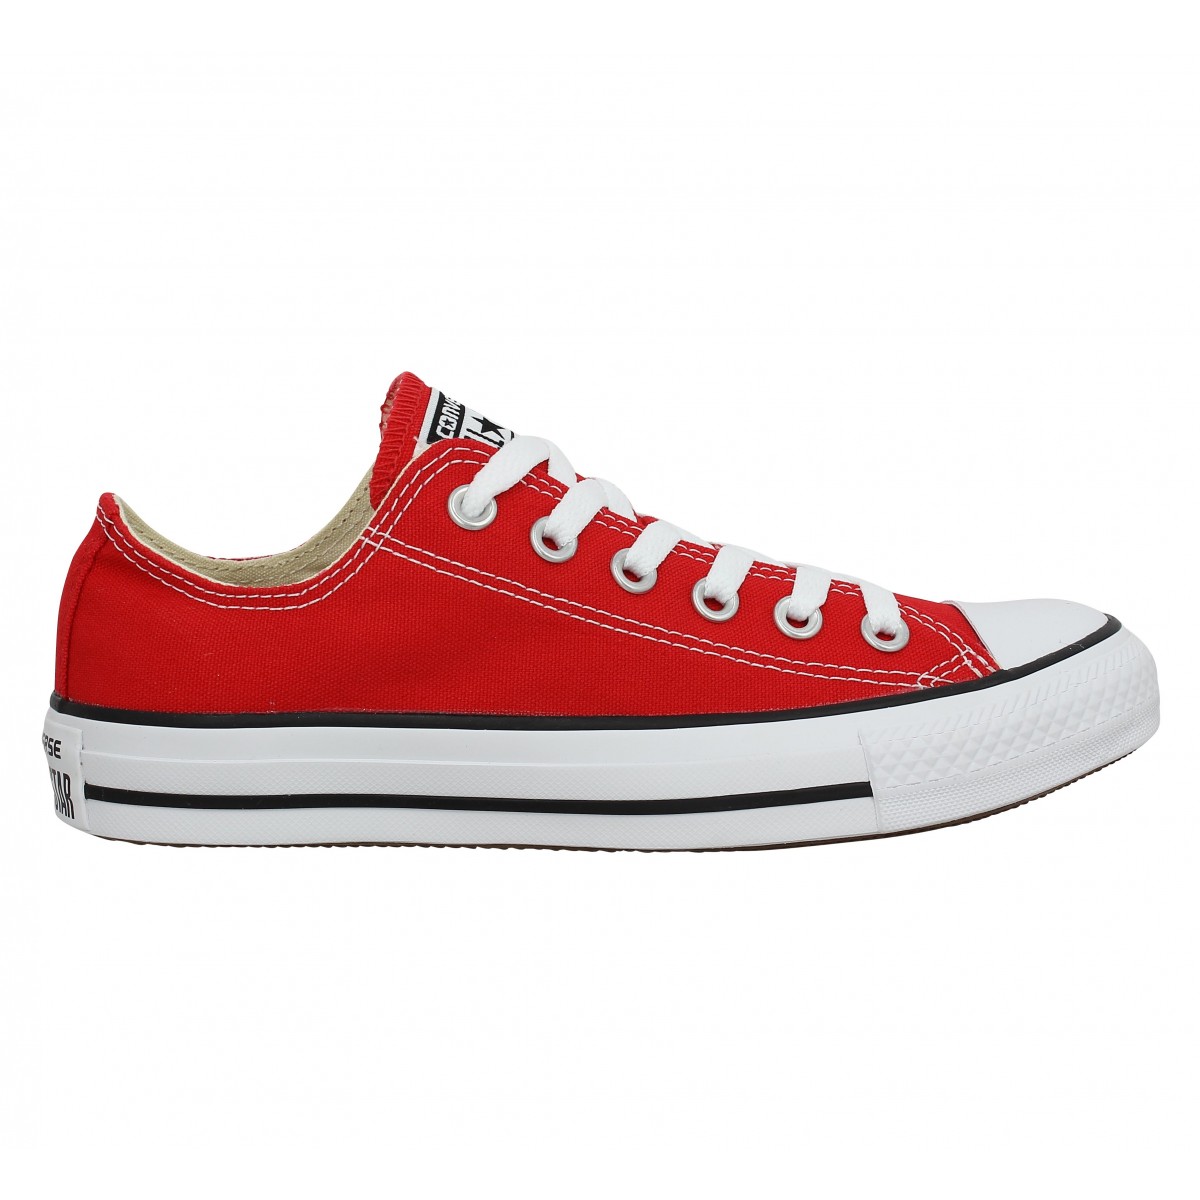 CONVERSE Chuck Taylor All Star toile Femme Rouge